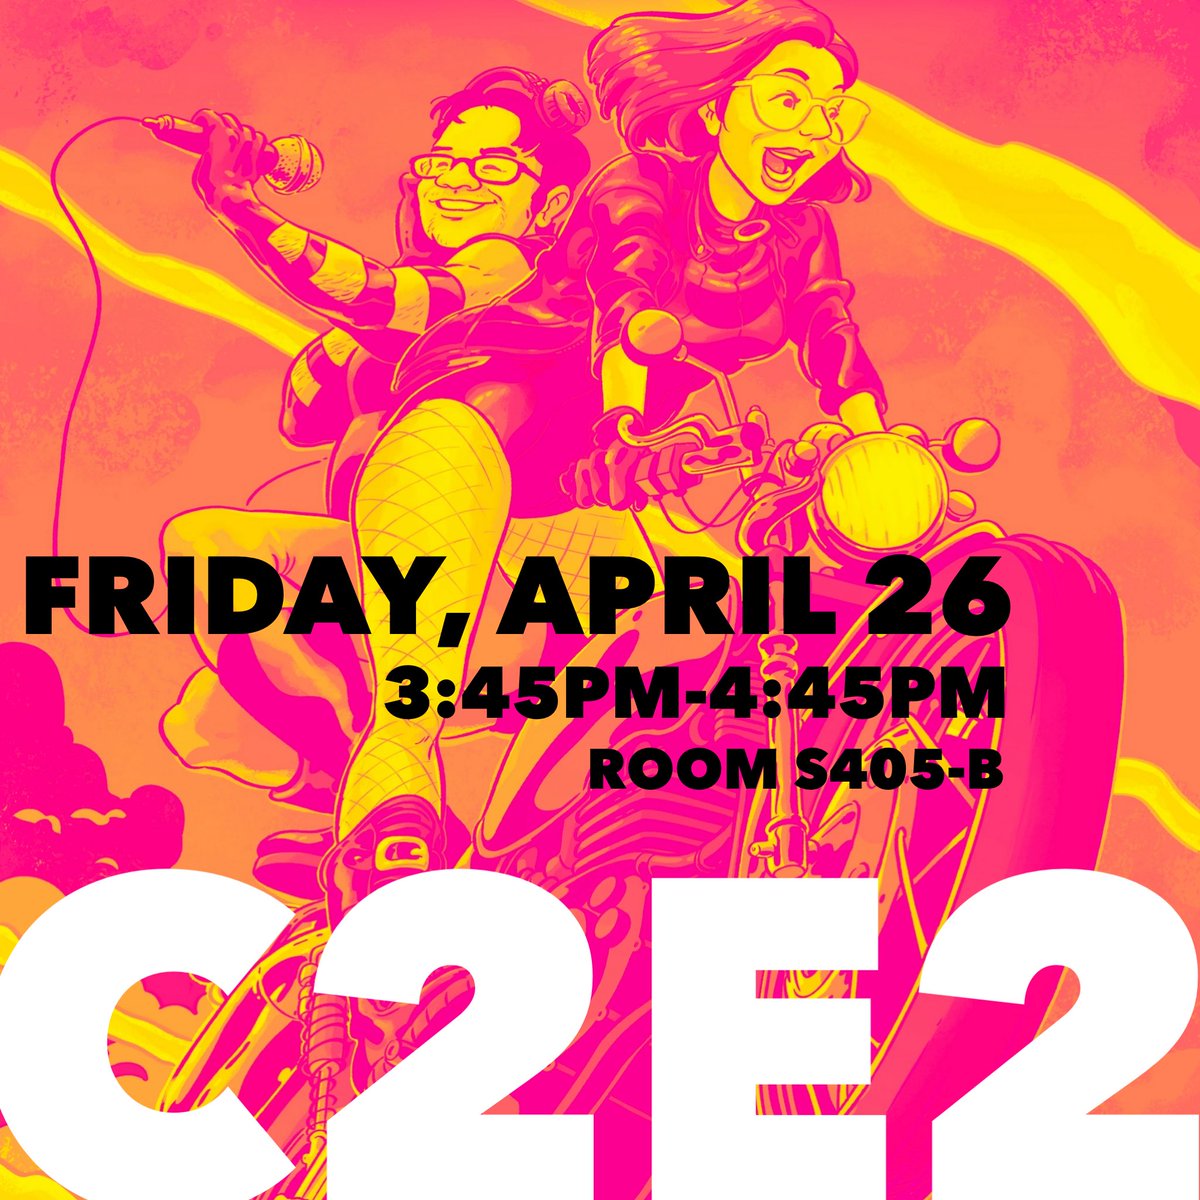 Hey #C2E2 folks! Come find us, Friday!